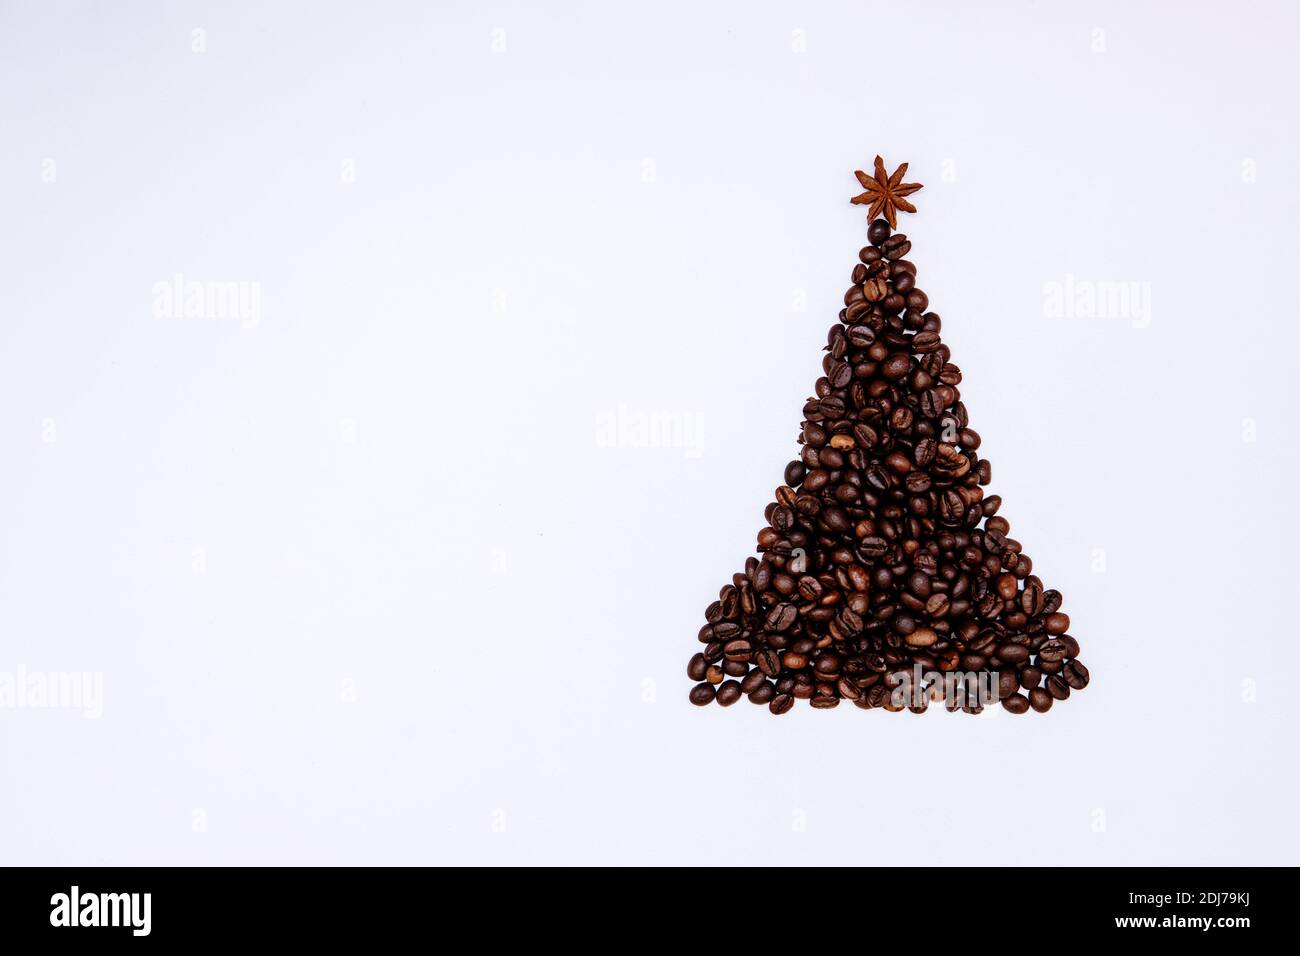 Christmas tree made of coffee beans with anise star on top. Minimal Christmas background Stock Photo